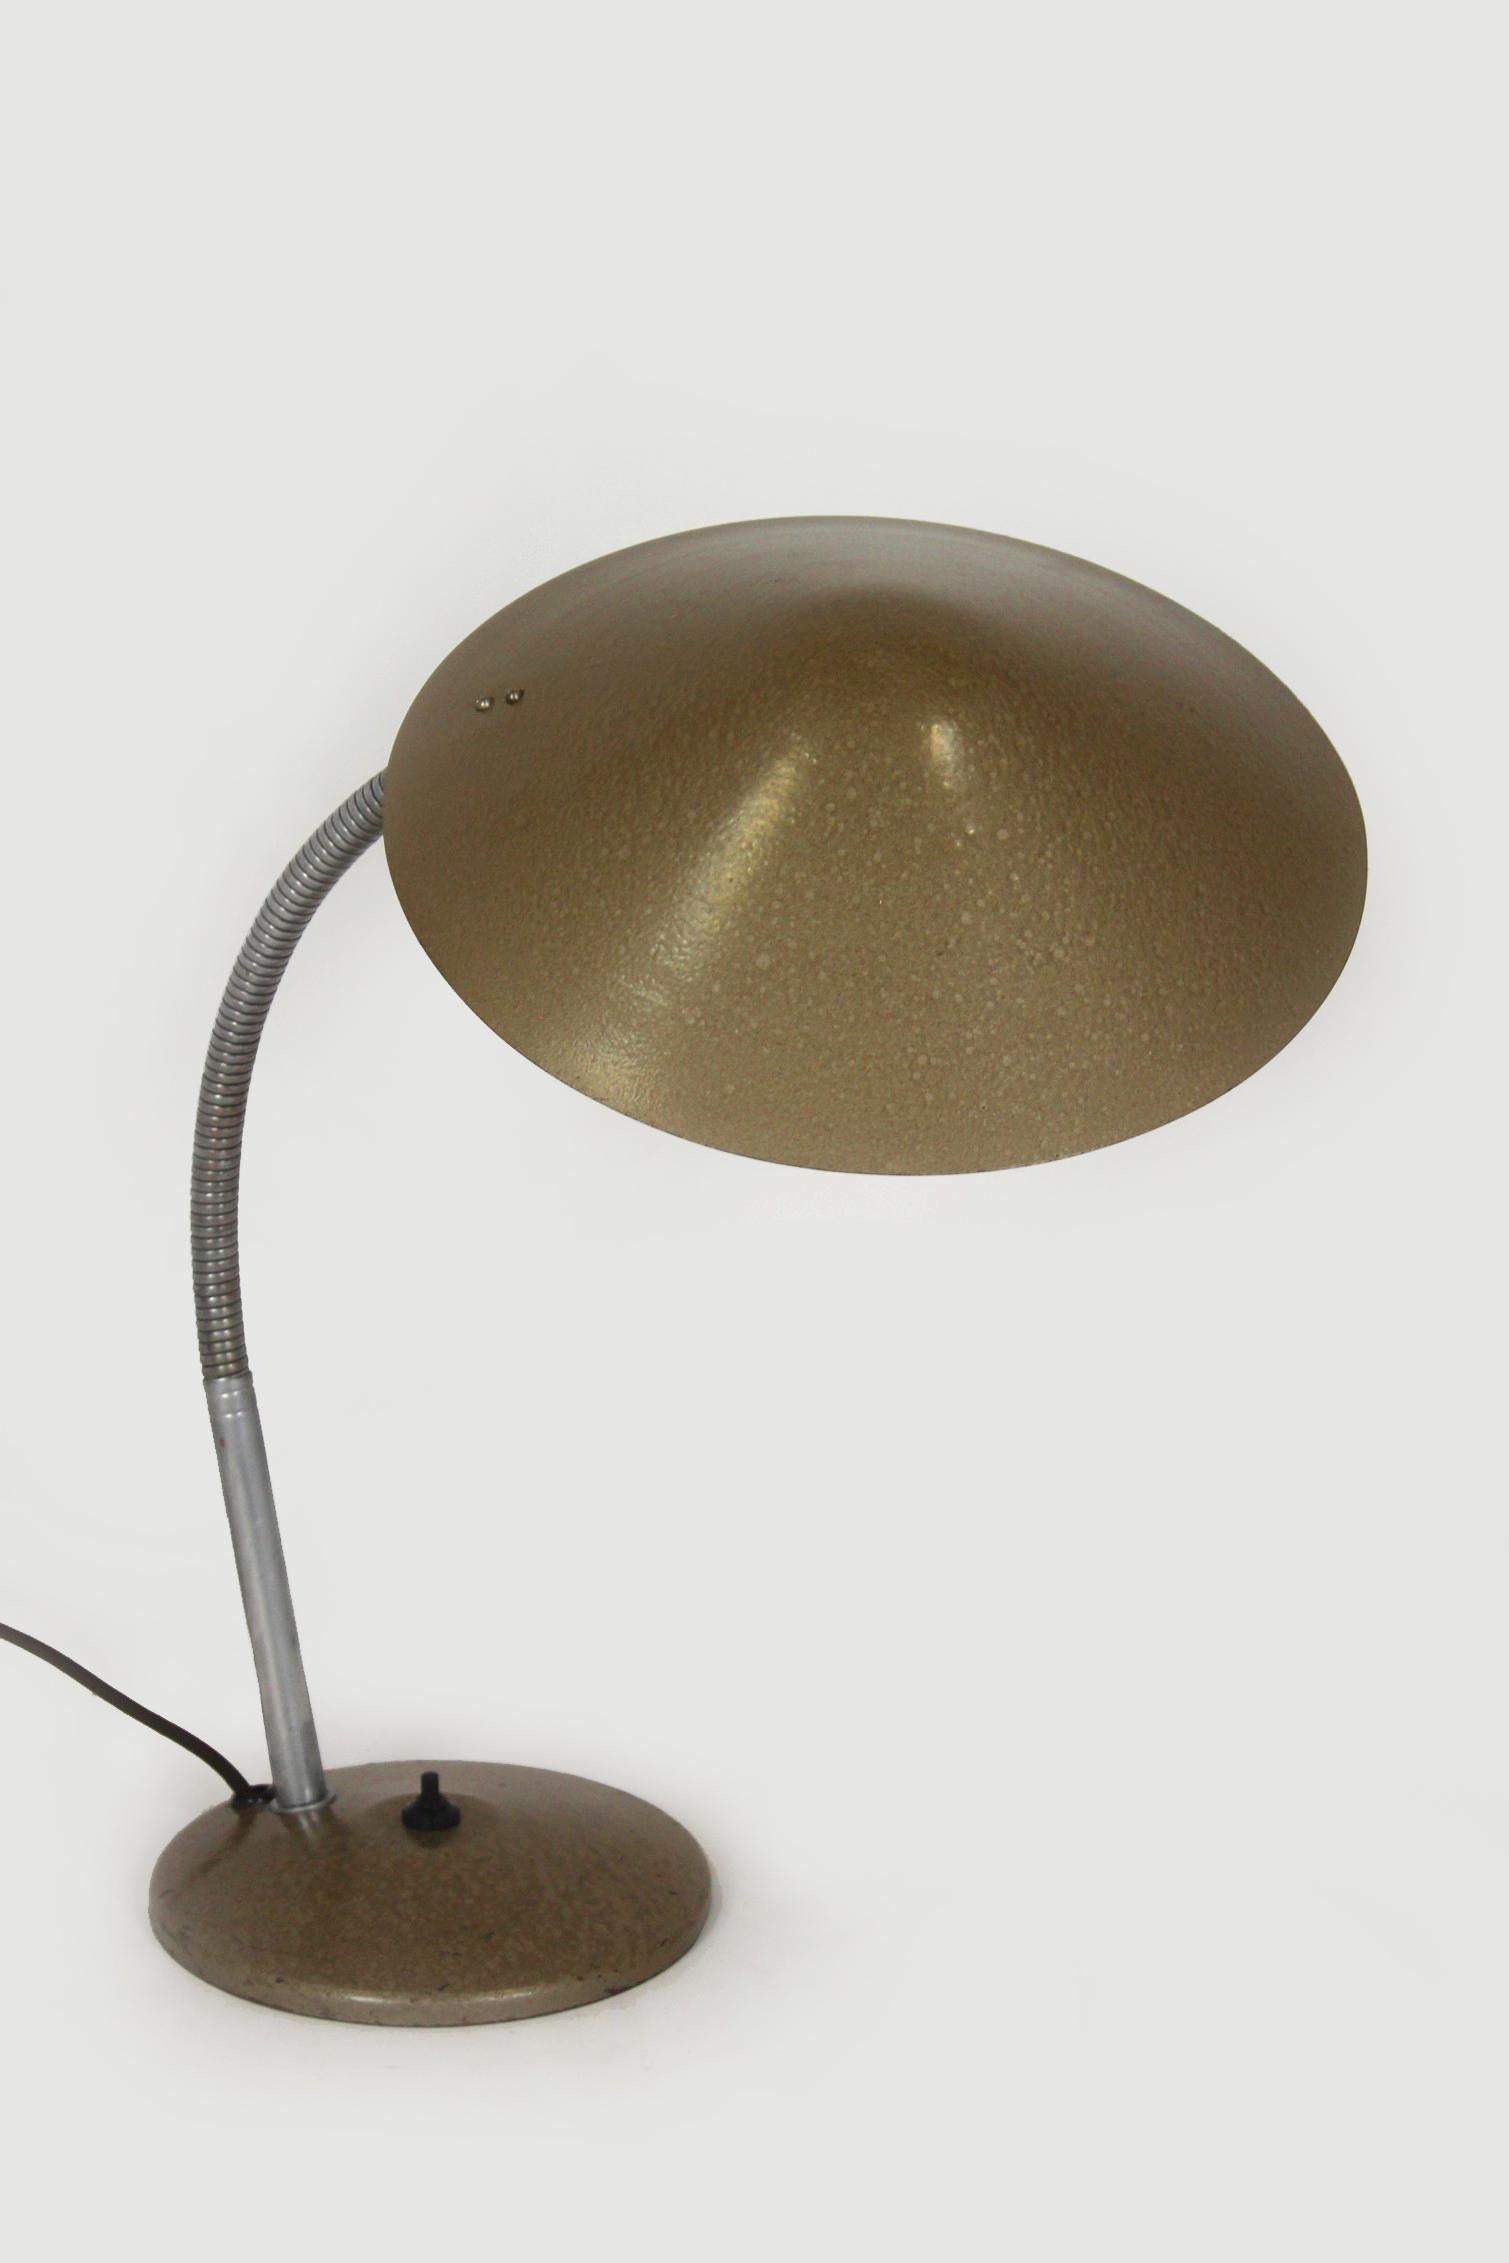 Large Industrial Bauhaus Style Table Lamp, 1940s For Sale 7